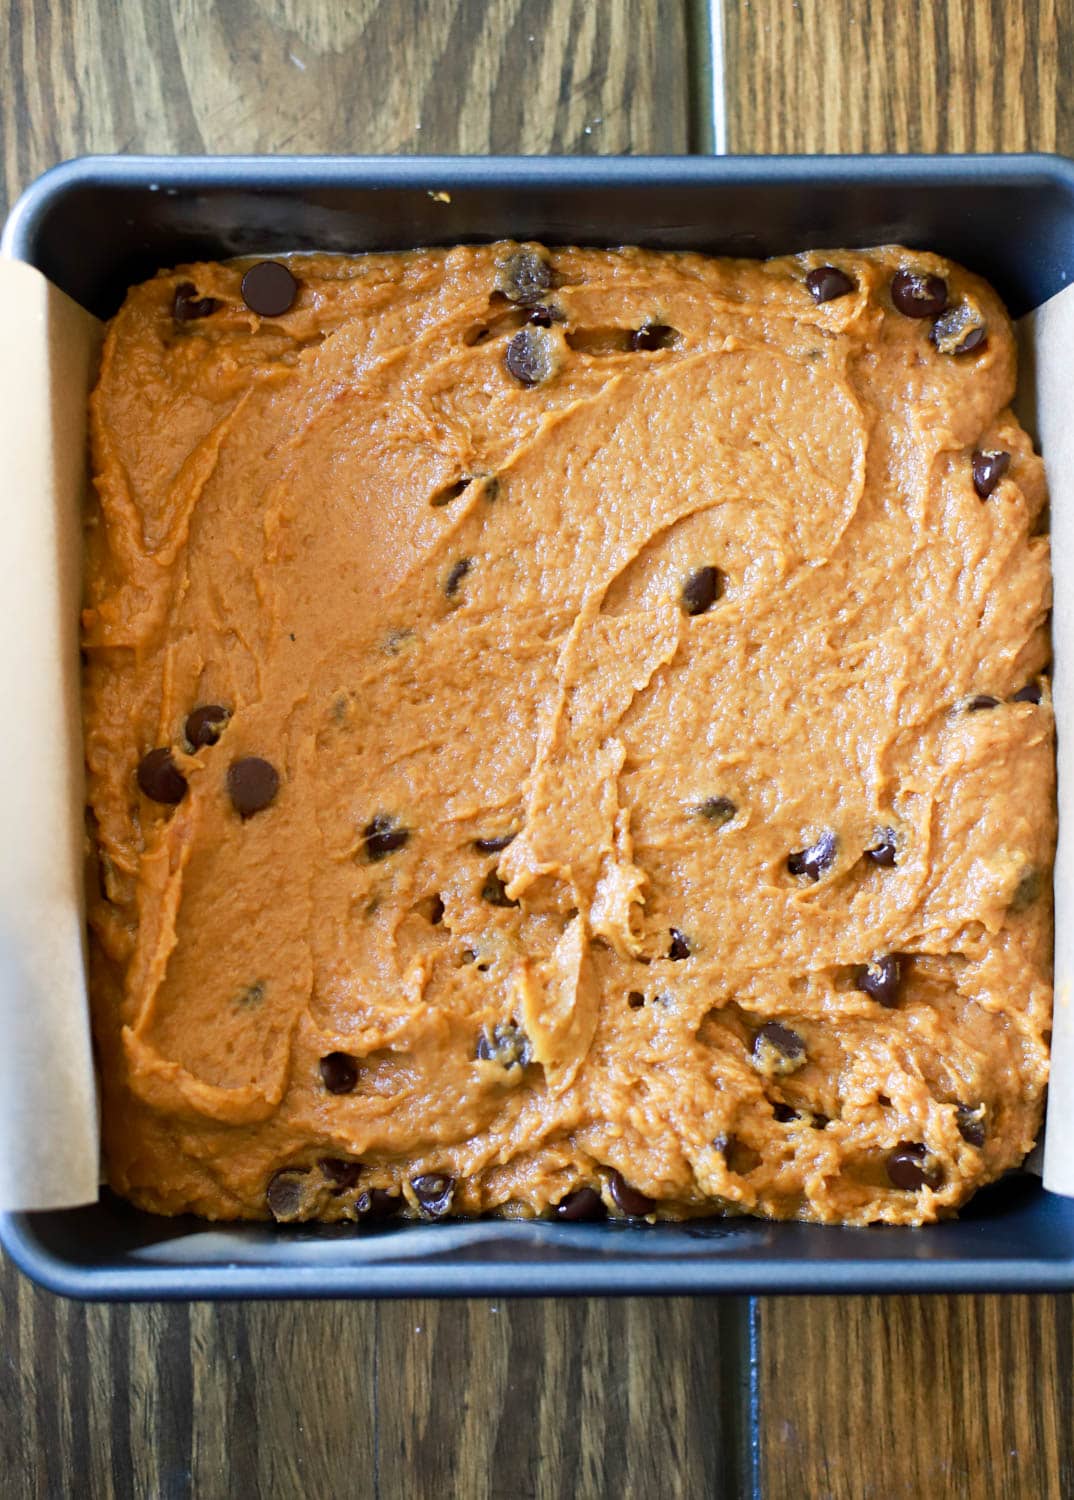 pan of unbaked blondie batter with chocolate chips.